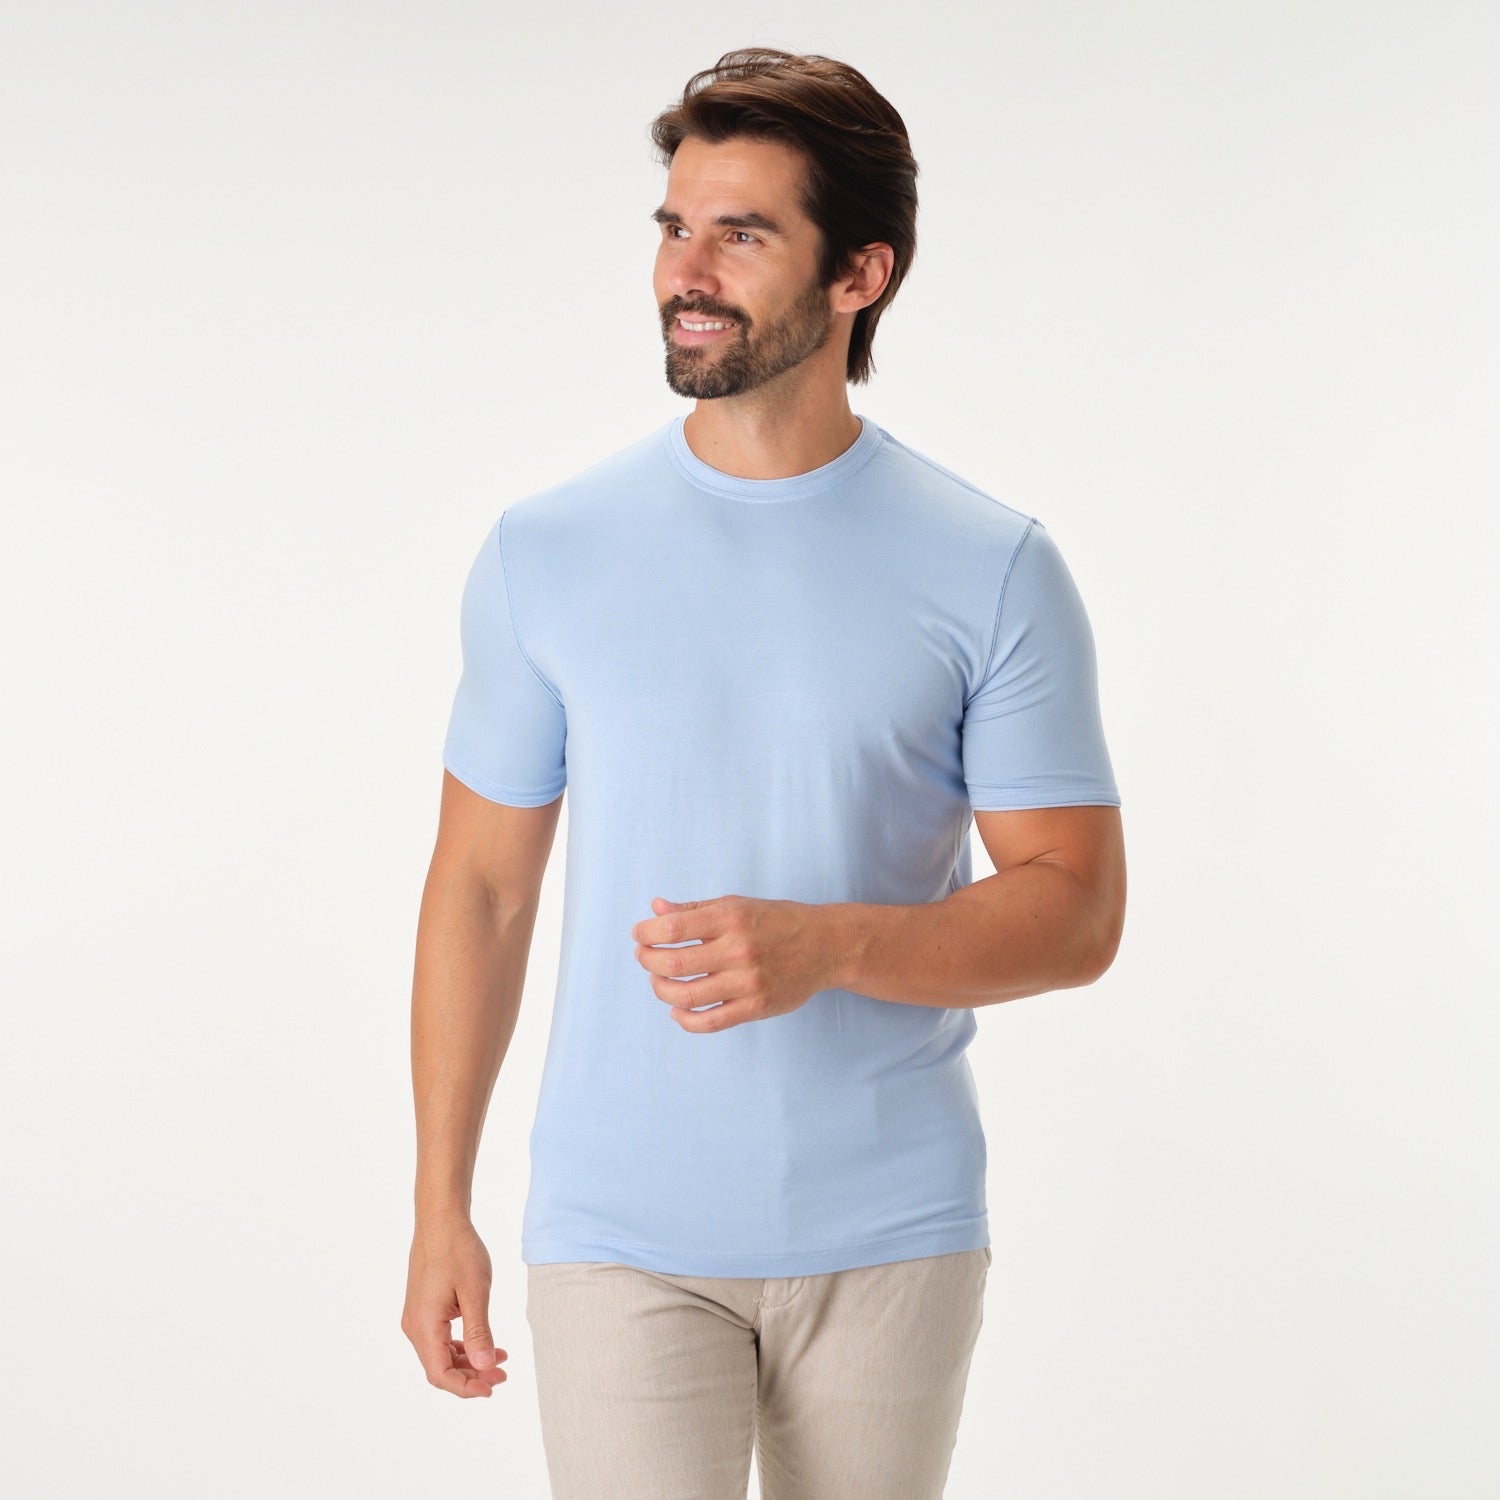 Solid Performance Blue Stitched Crew Neck T-Shirt